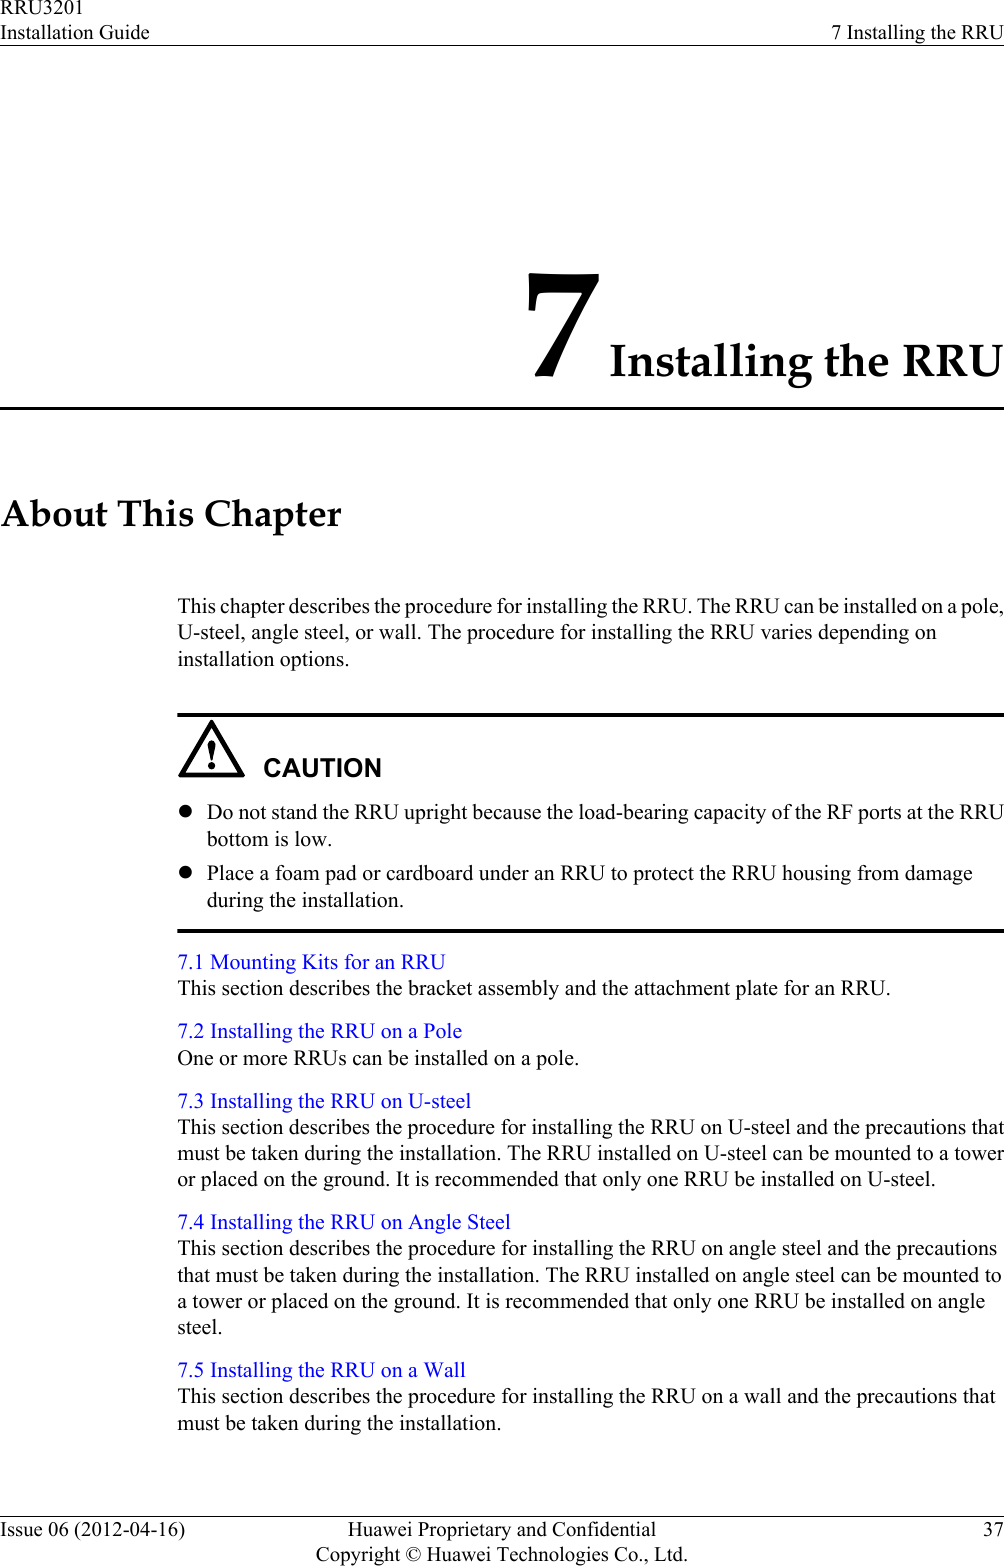 7 Installing the RRUAbout This ChapterThis chapter describes the procedure for installing the RRU. The RRU can be installed on a pole,U-steel, angle steel, or wall. The procedure for installing the RRU varies depending oninstallation options.CAUTIONlDo not stand the RRU upright because the load-bearing capacity of the RF ports at the RRUbottom is low.lPlace a foam pad or cardboard under an RRU to protect the RRU housing from damageduring the installation.7.1 Mounting Kits for an RRUThis section describes the bracket assembly and the attachment plate for an RRU.7.2 Installing the RRU on a PoleOne or more RRUs can be installed on a pole.7.3 Installing the RRU on U-steelThis section describes the procedure for installing the RRU on U-steel and the precautions thatmust be taken during the installation. The RRU installed on U-steel can be mounted to a toweror placed on the ground. It is recommended that only one RRU be installed on U-steel.7.4 Installing the RRU on Angle SteelThis section describes the procedure for installing the RRU on angle steel and the precautionsthat must be taken during the installation. The RRU installed on angle steel can be mounted toa tower or placed on the ground. It is recommended that only one RRU be installed on anglesteel.7.5 Installing the RRU on a WallThis section describes the procedure for installing the RRU on a wall and the precautions thatmust be taken during the installation.RRU3201Installation Guide 7 Installing the RRUIssue 06 (2012-04-16) Huawei Proprietary and ConfidentialCopyright © Huawei Technologies Co., Ltd.37